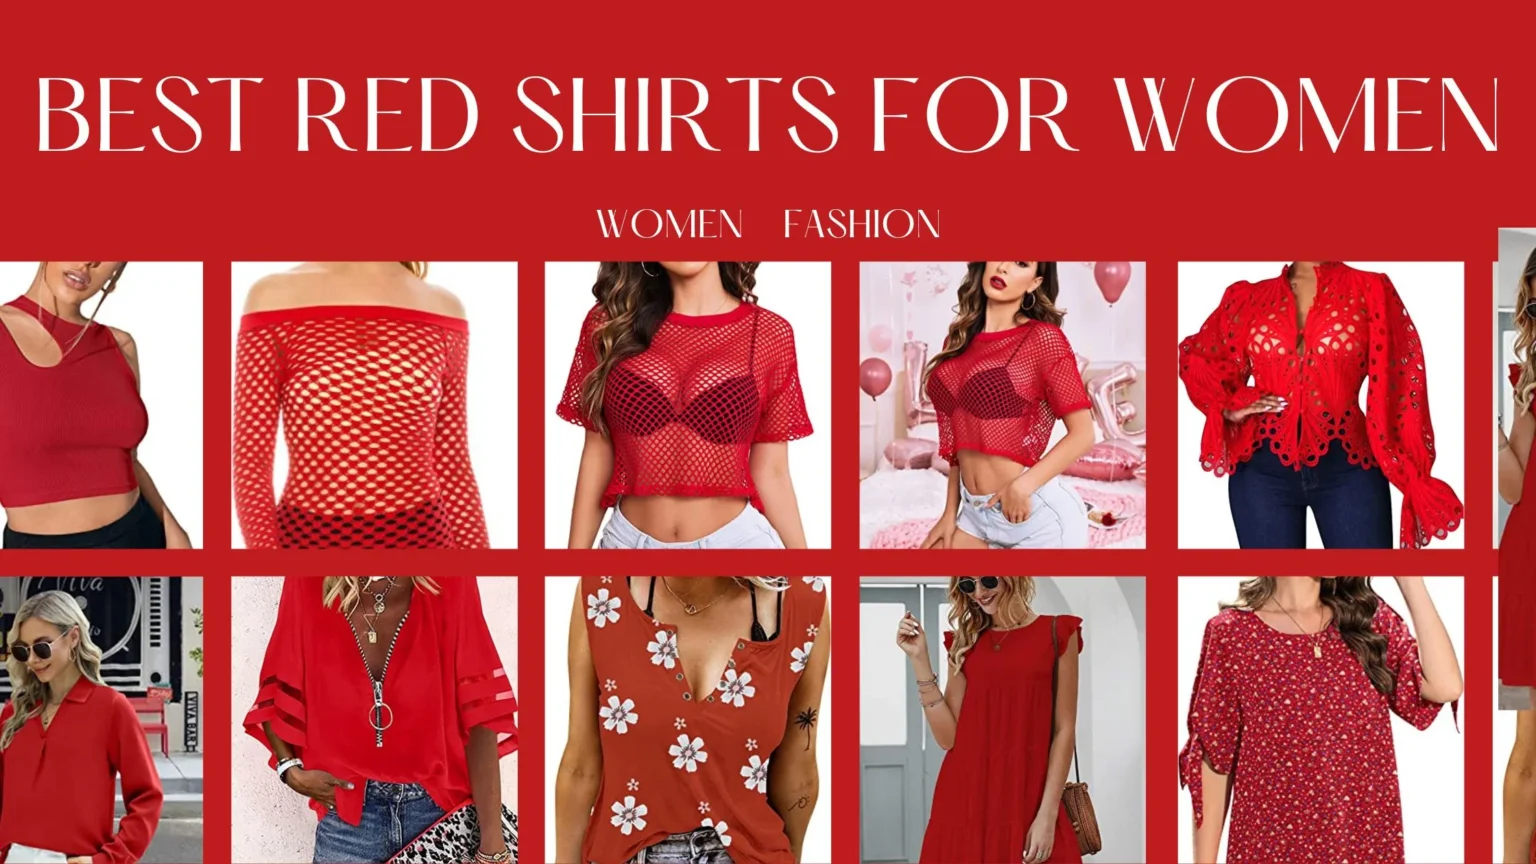 Red Shirts for Women